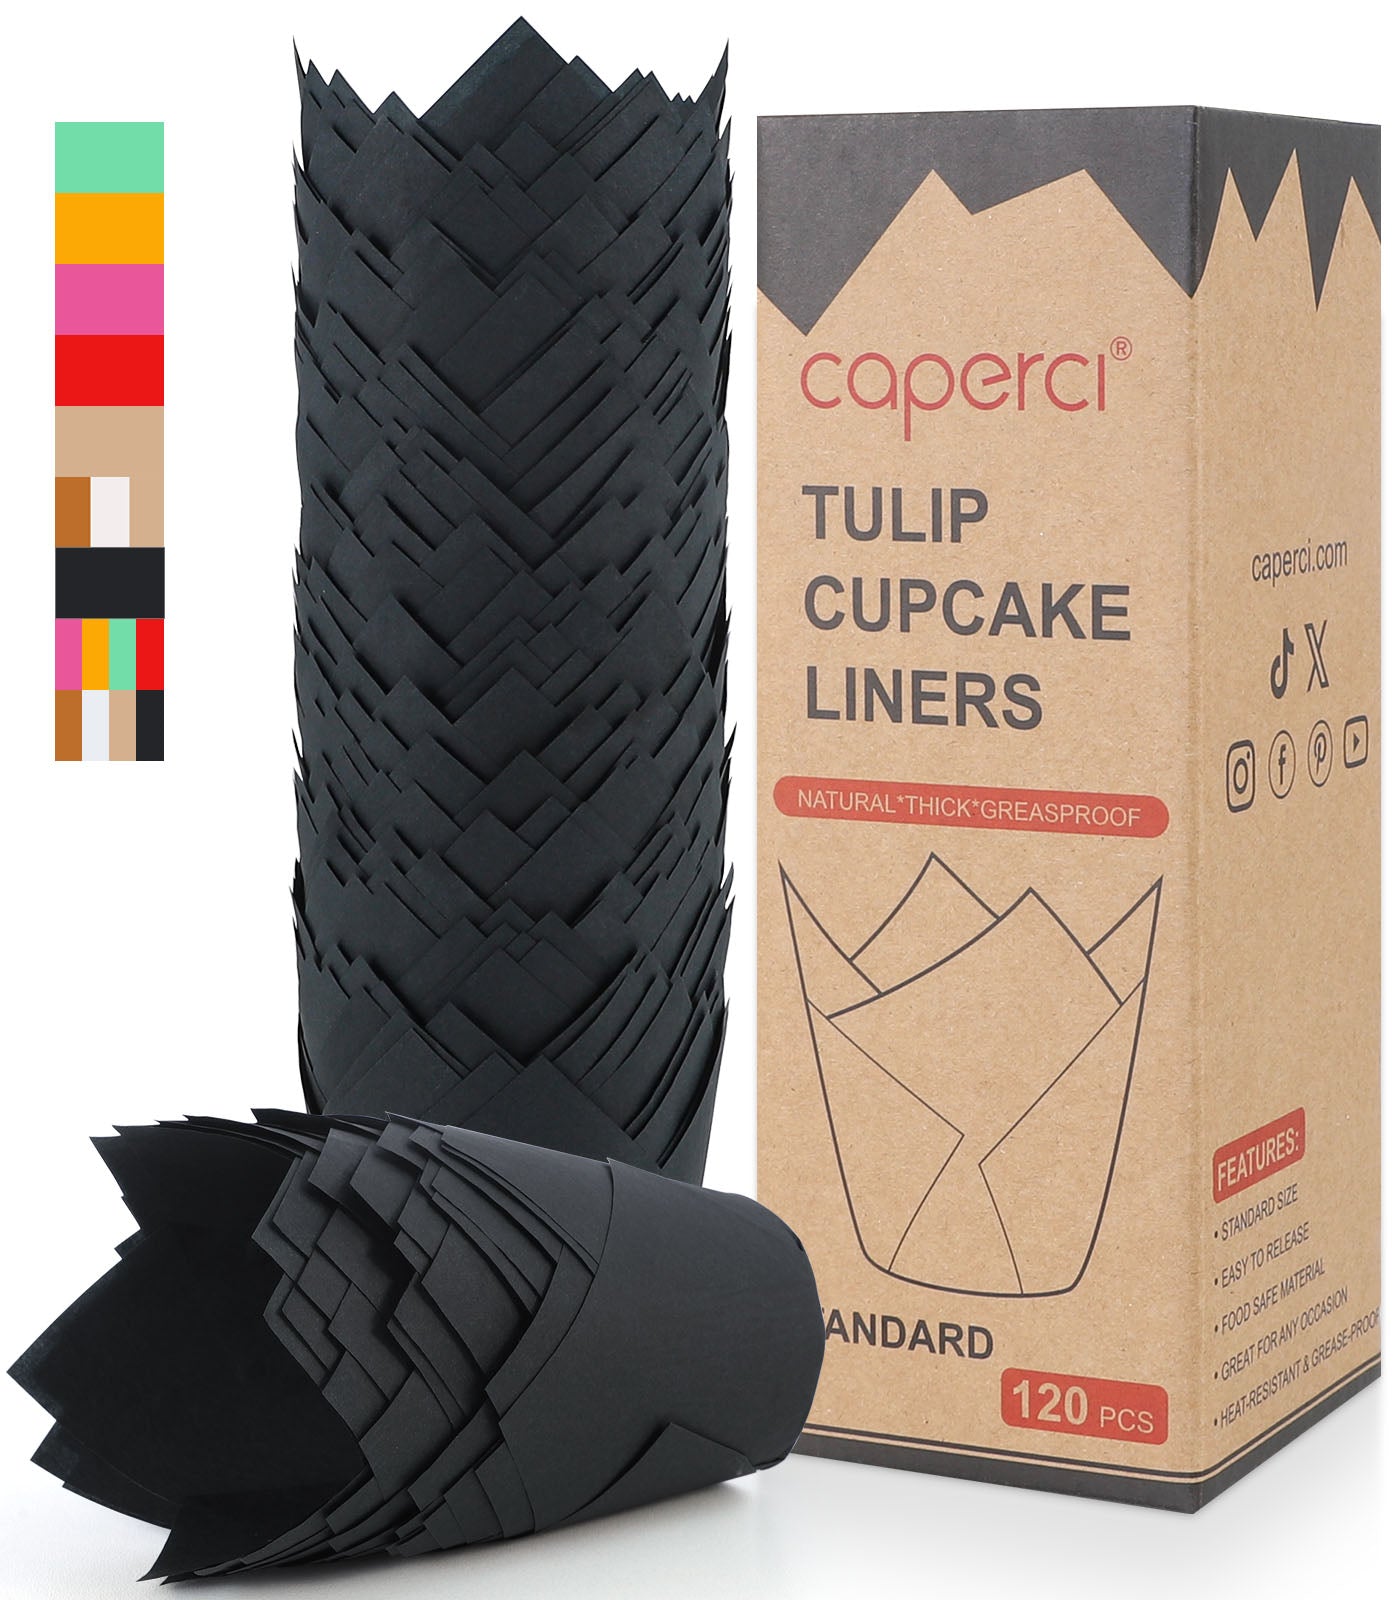 Caperci Standard Tulip Cupcake Liners for Baking 120 Counts - Greasepr